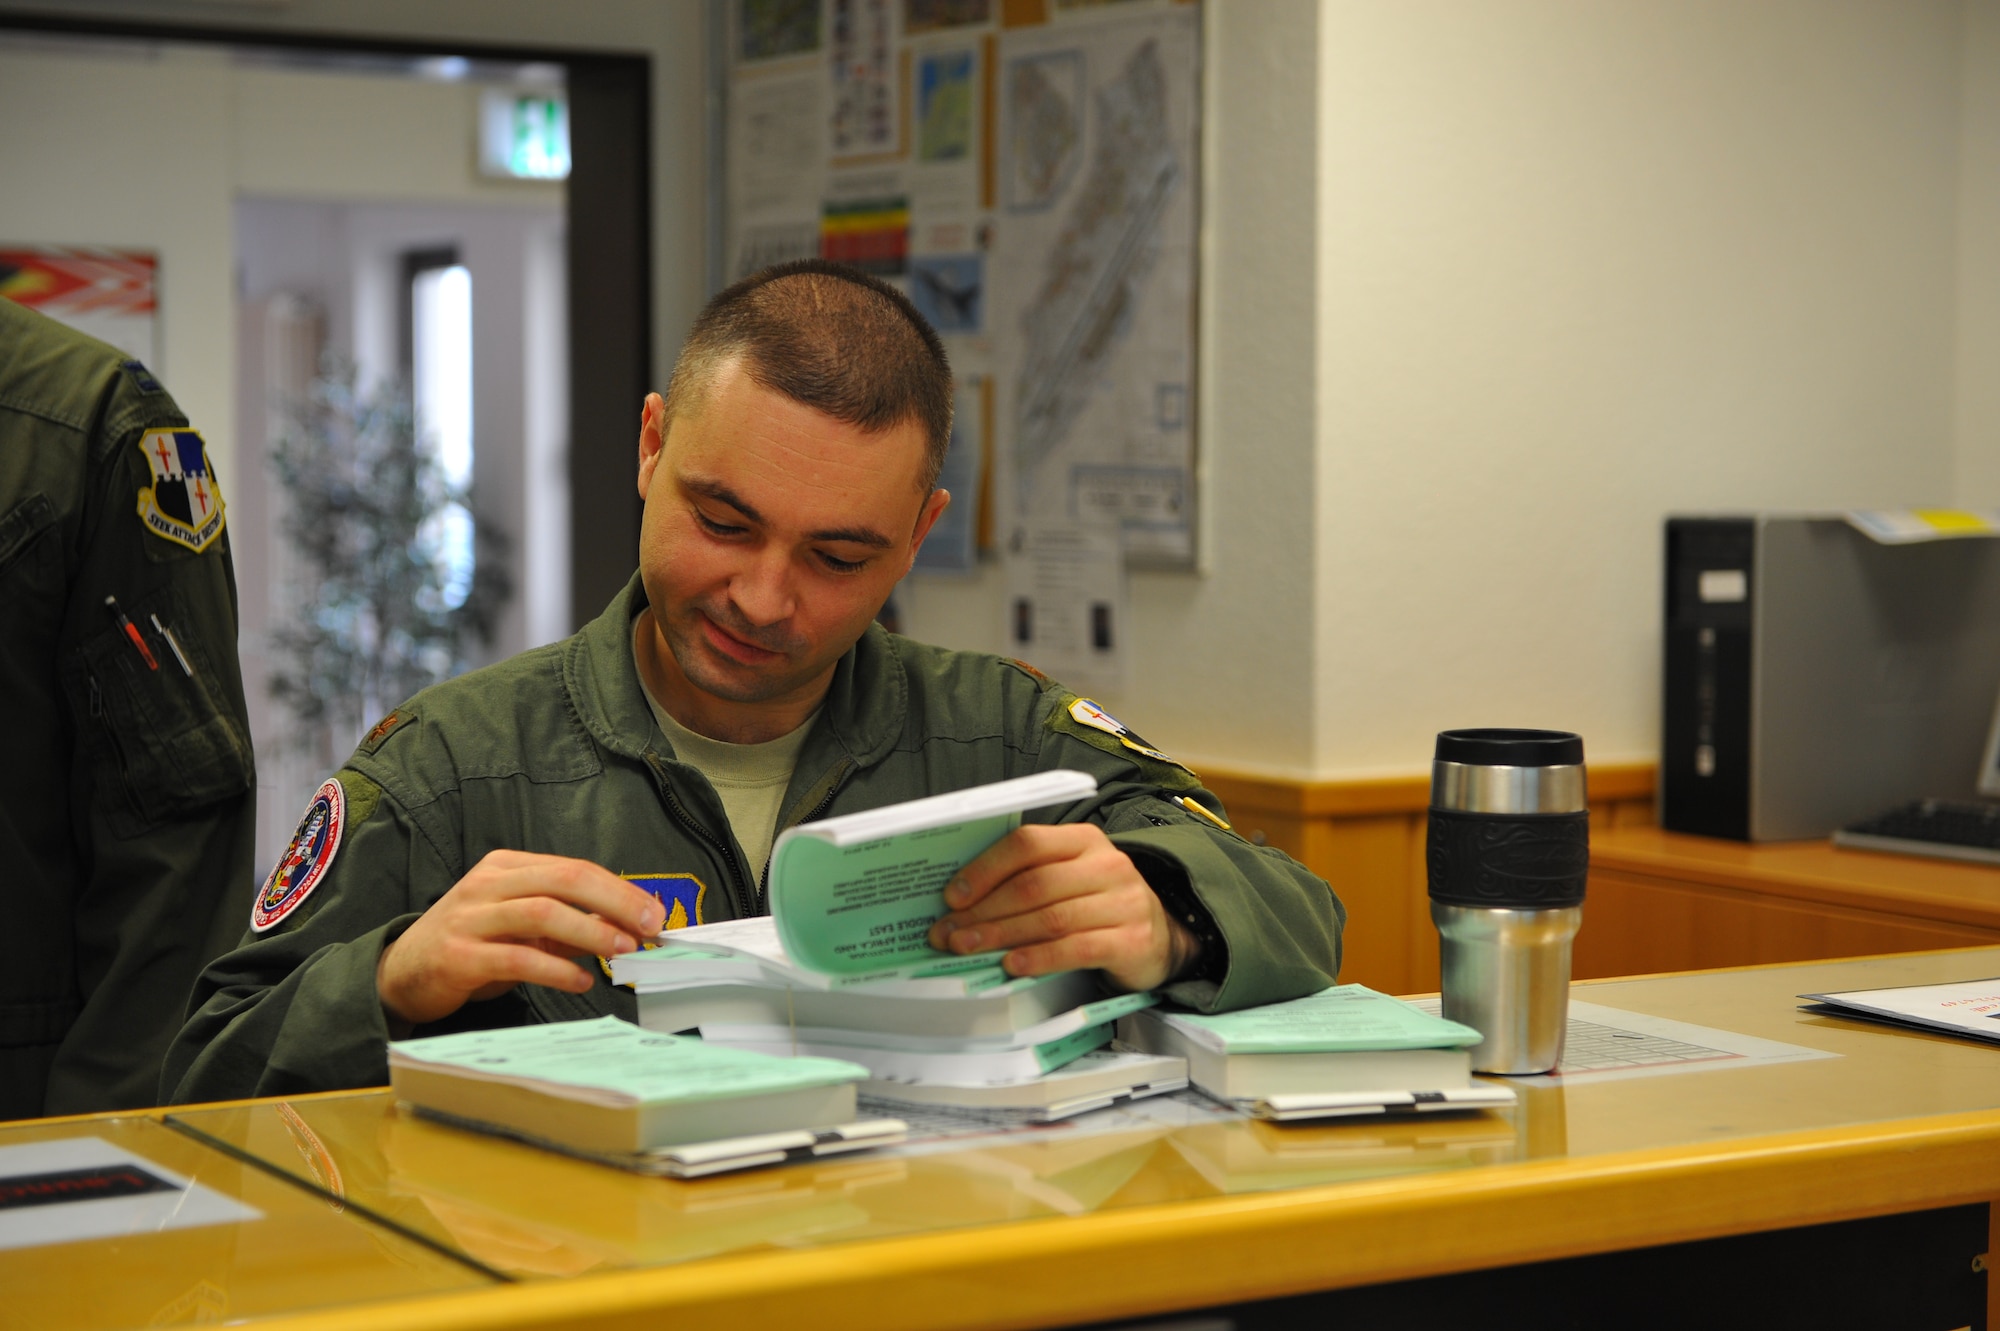 SPANGDAHLEM AIR BASE, Germany – Maj. Roman Pyatkov, 480th Fighter Squadron pilot, reads a flight publication before a pre-flight briefing inside Bldg. 108 here Feb. 21. Publications are used by pilots during flight training and missions to give pilots additional resources for various situations. Twelve Airmen work at the squadron’s operations desk and are responsible for coordinating with base operations, weather operations and aircraft maintenance to ensure flight operations run smoothly. The operations desk is also responsible for gathering and organizing flight information to help log flight hours and brief pilots before, during and after flights. (U.S. Air Force photo by Airman 1st Class Dillon Davis/Released)